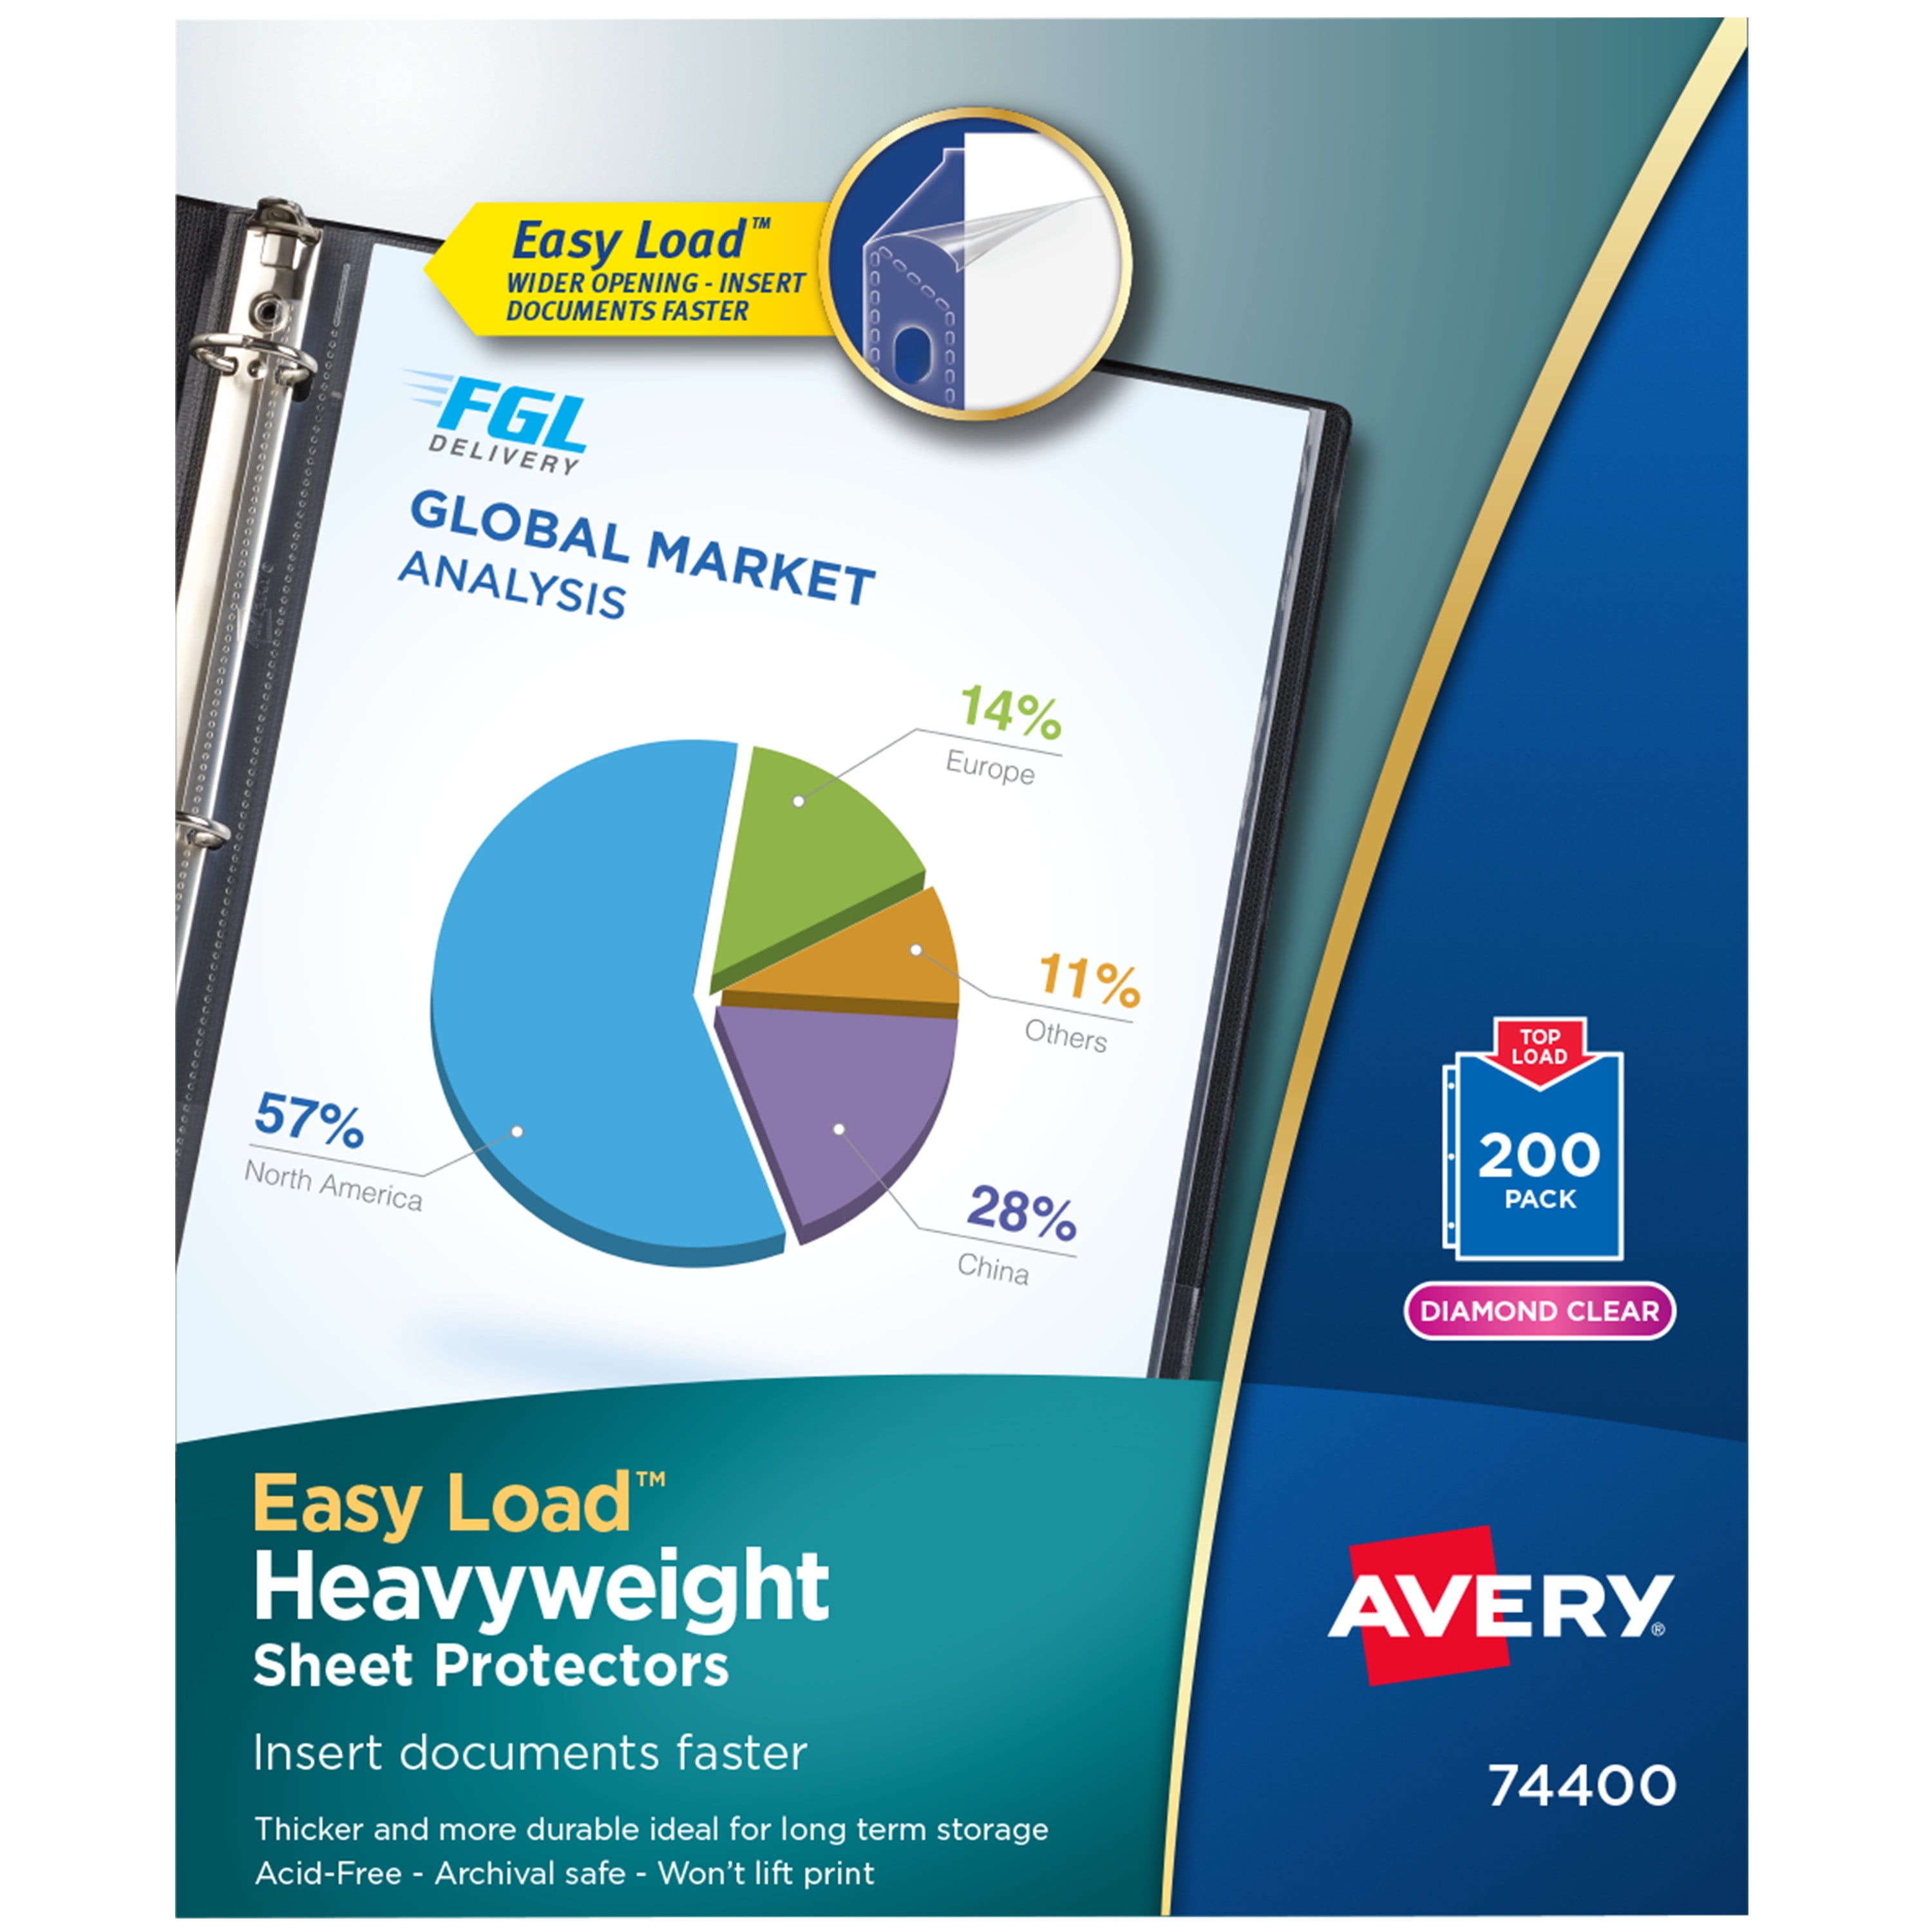 50 Pack Diamond Clear Avery 74130 Easy Load Super Heavyweight Sheet Protector 